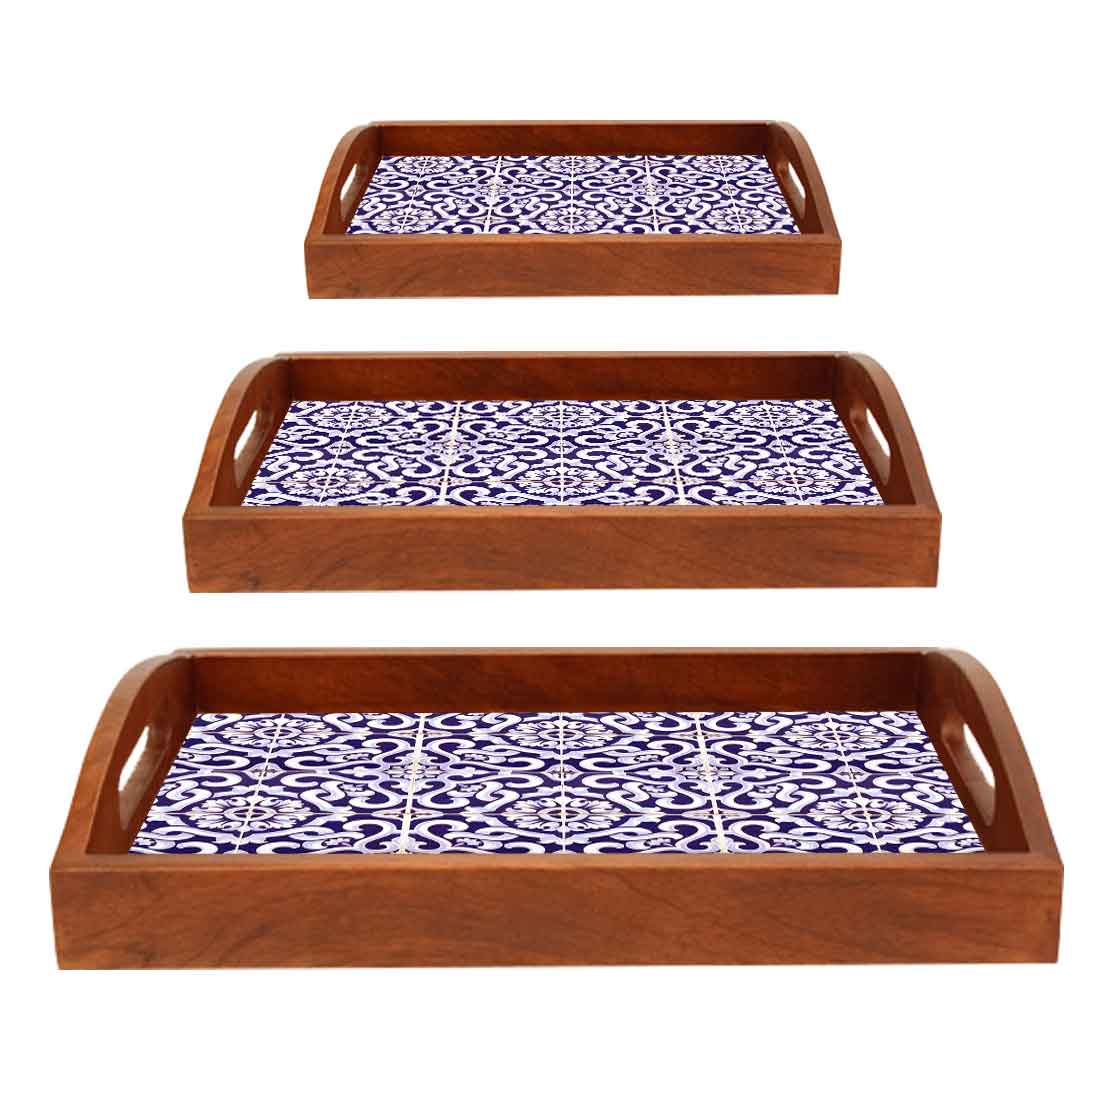 Designer Wooden Food Serving Tray with Handle Set of 3 